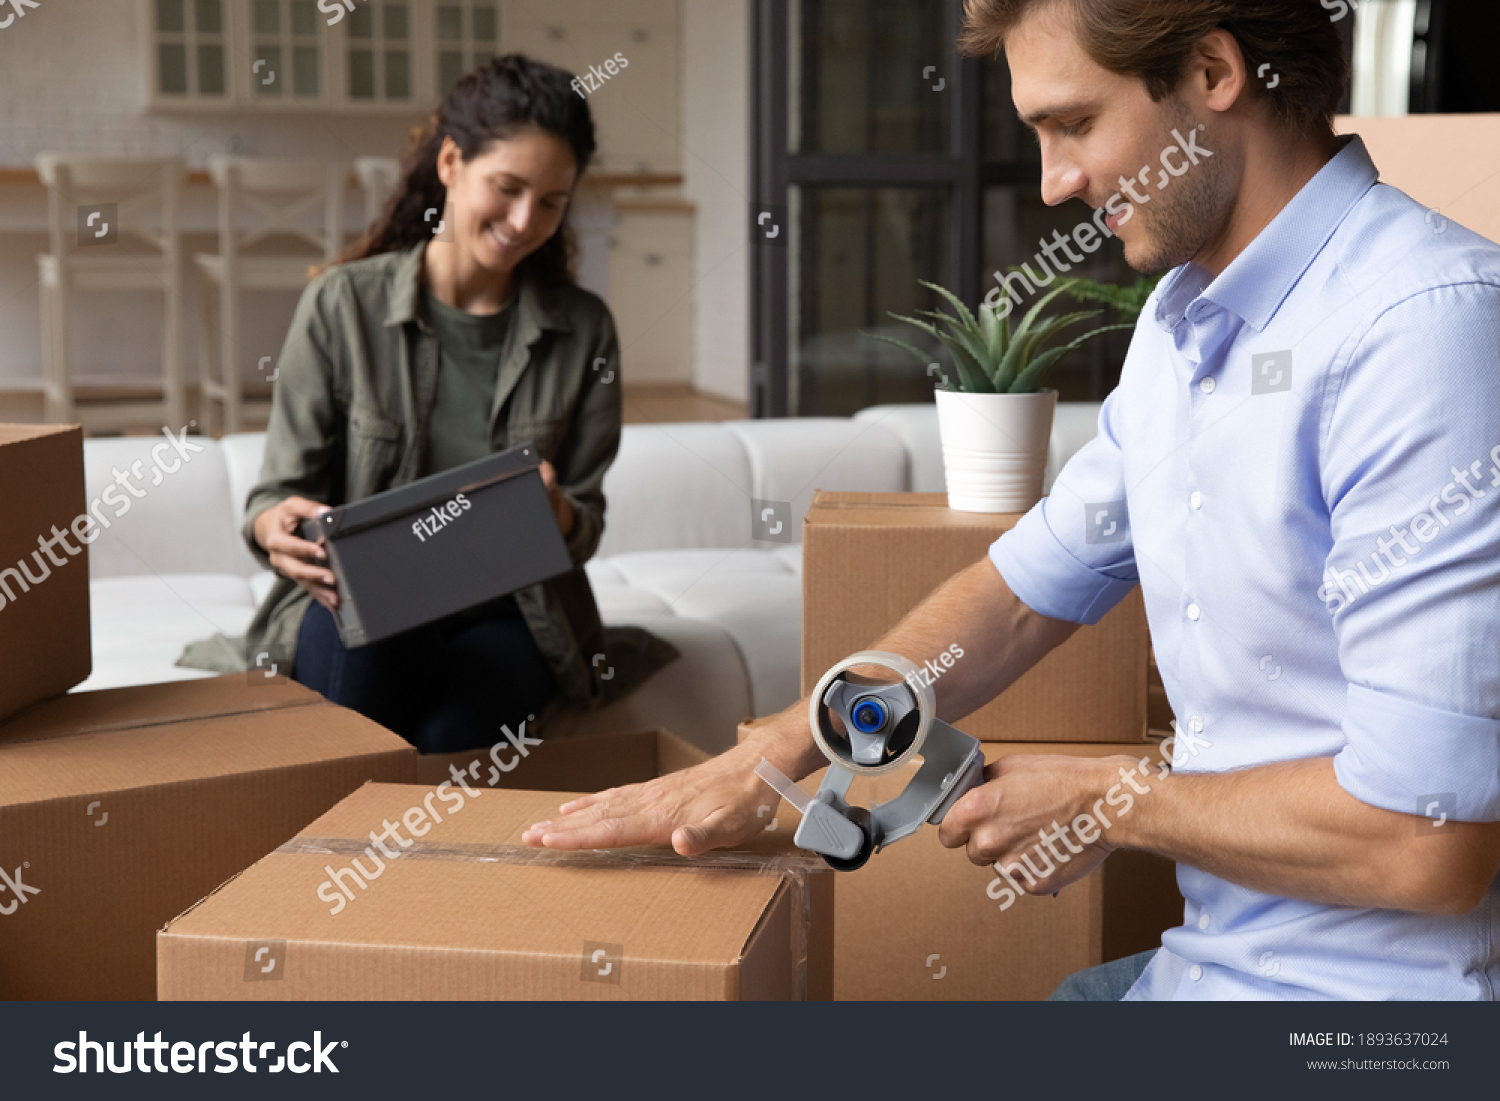 Happy young Caucasian man and woman seal wrap packages with tape dispenser relocate to new house. Smiling millennial couple renters pack boxes with adhesive scotch, moving to own home together. #1893637024